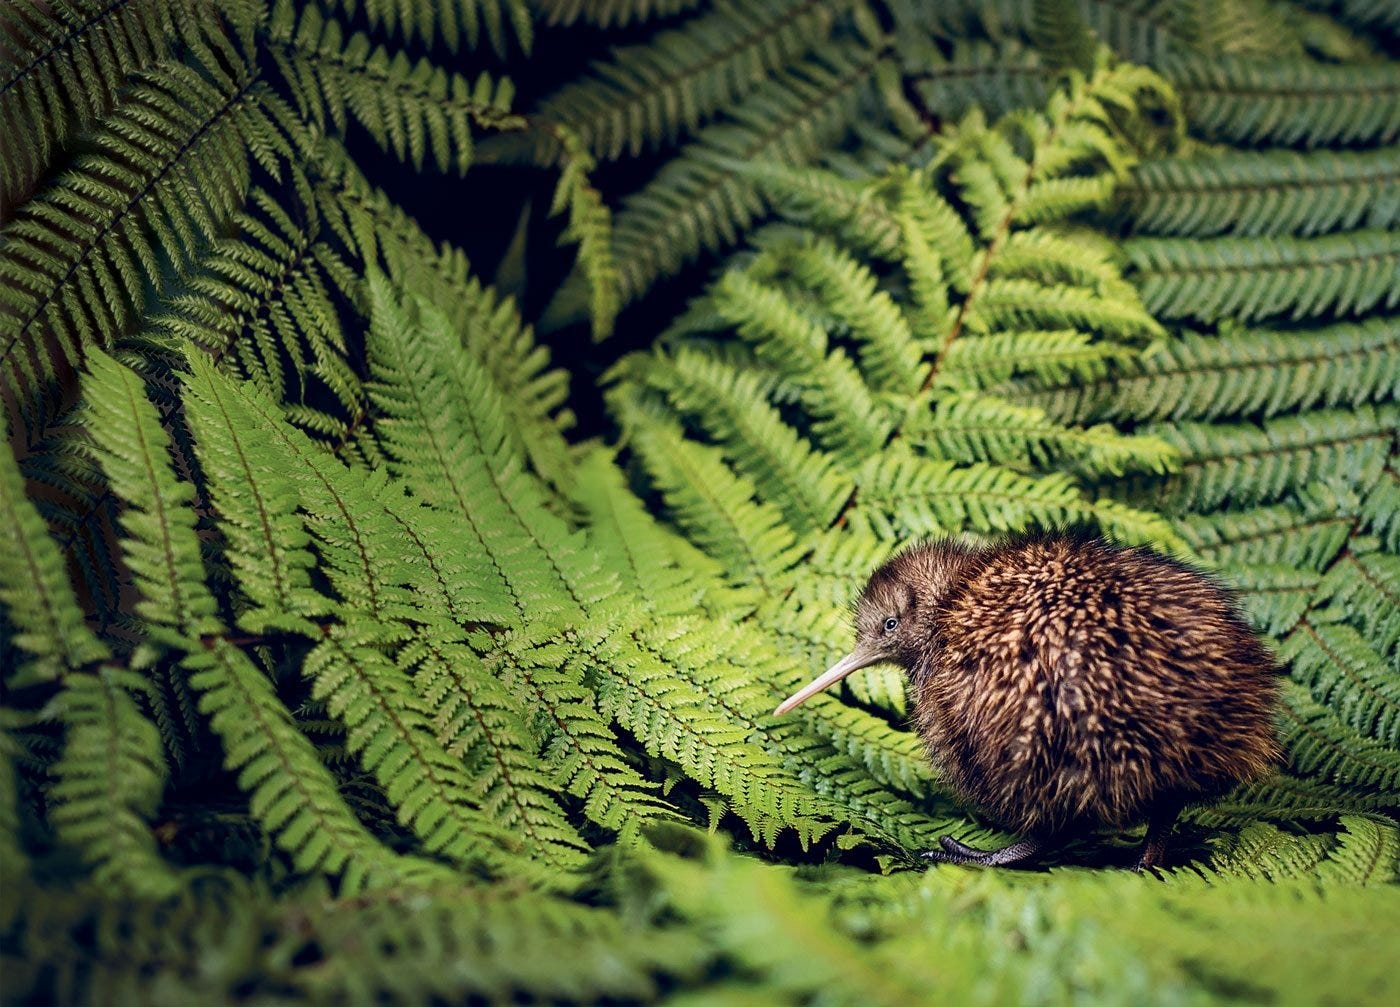 New Zealand’s Kiwi Bird Is in Danger of Disappearing—Meet the People Trying to Save It - Flipboard